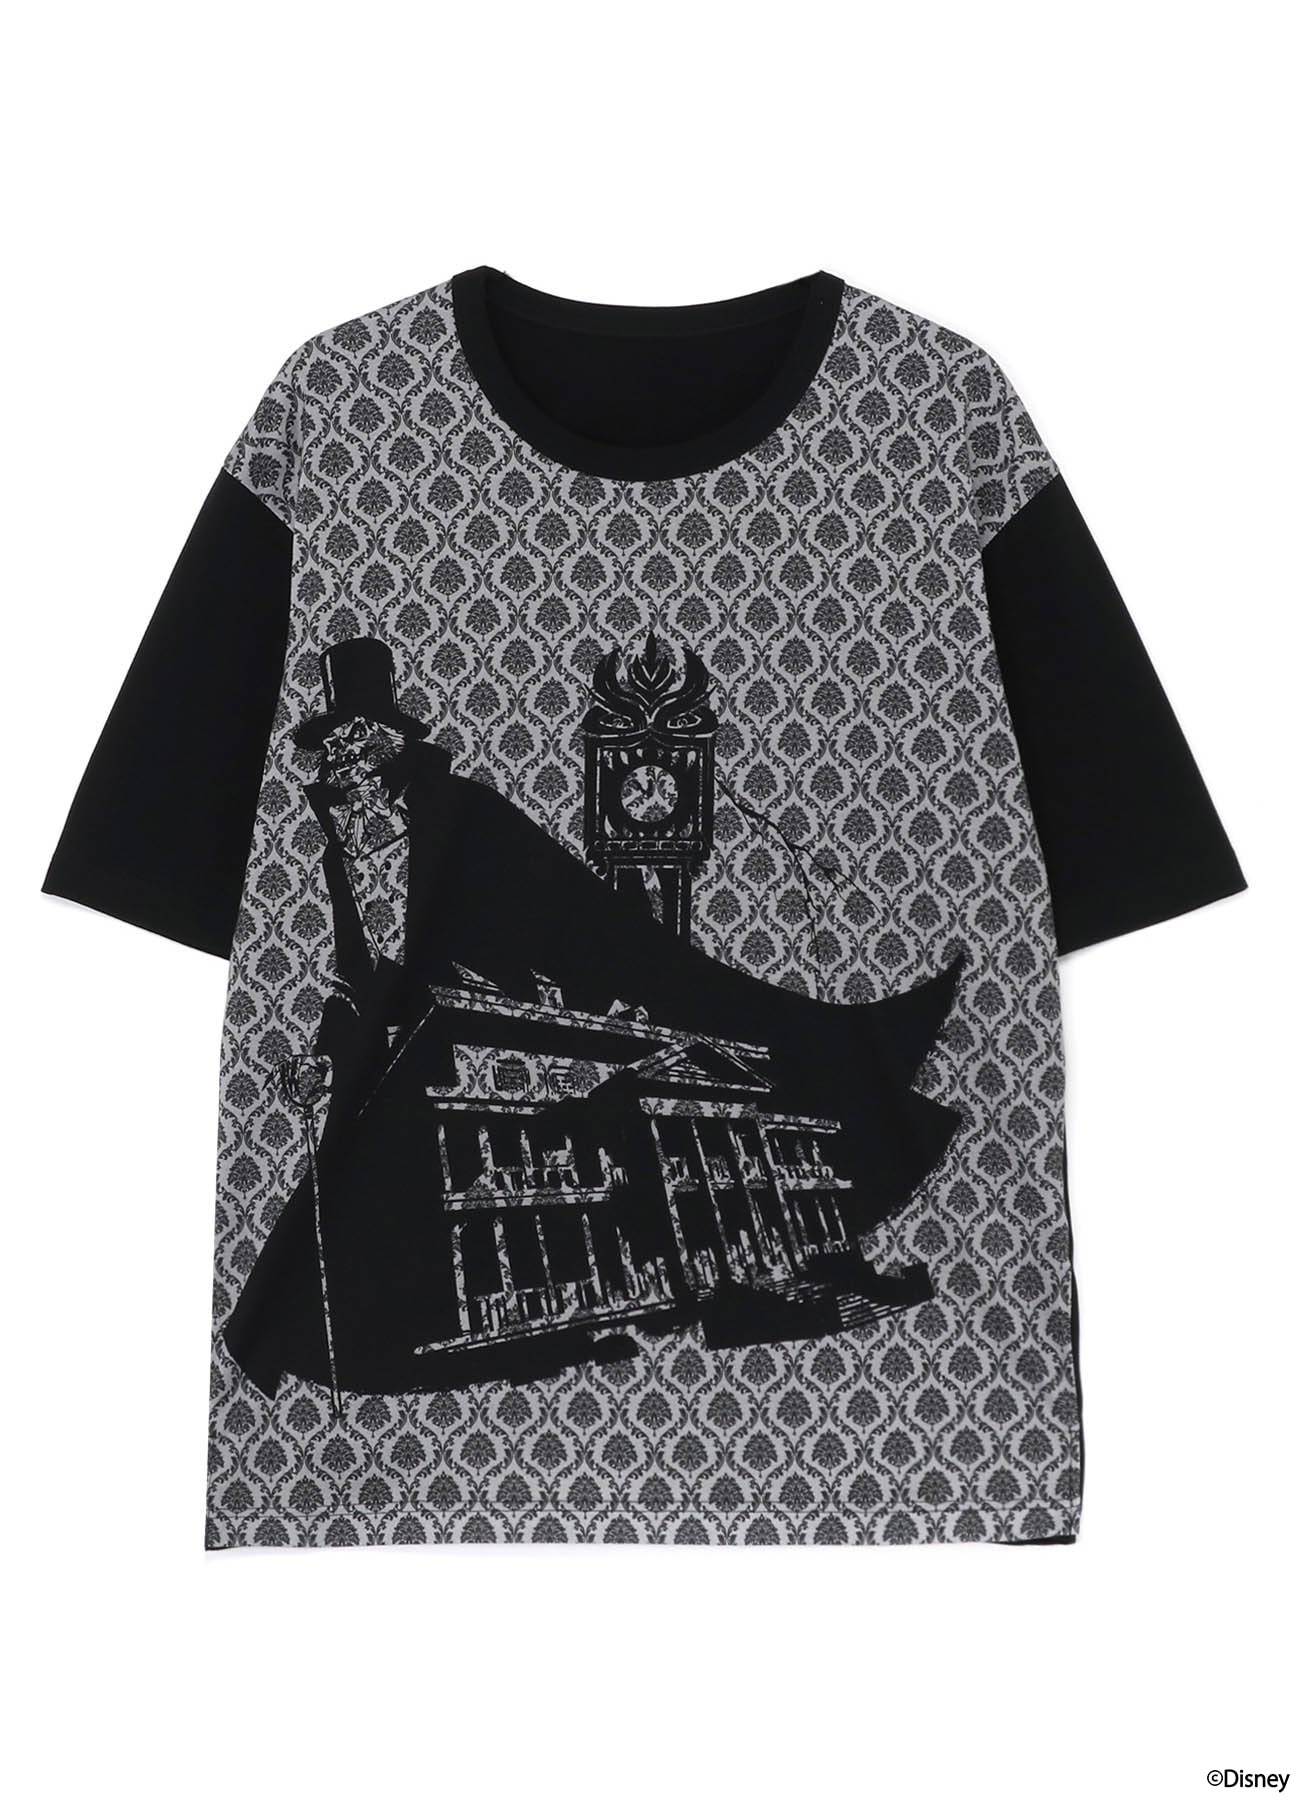 Ground Y/Haunted Mansion collection [HATBOX GHOST T-SHIRT]